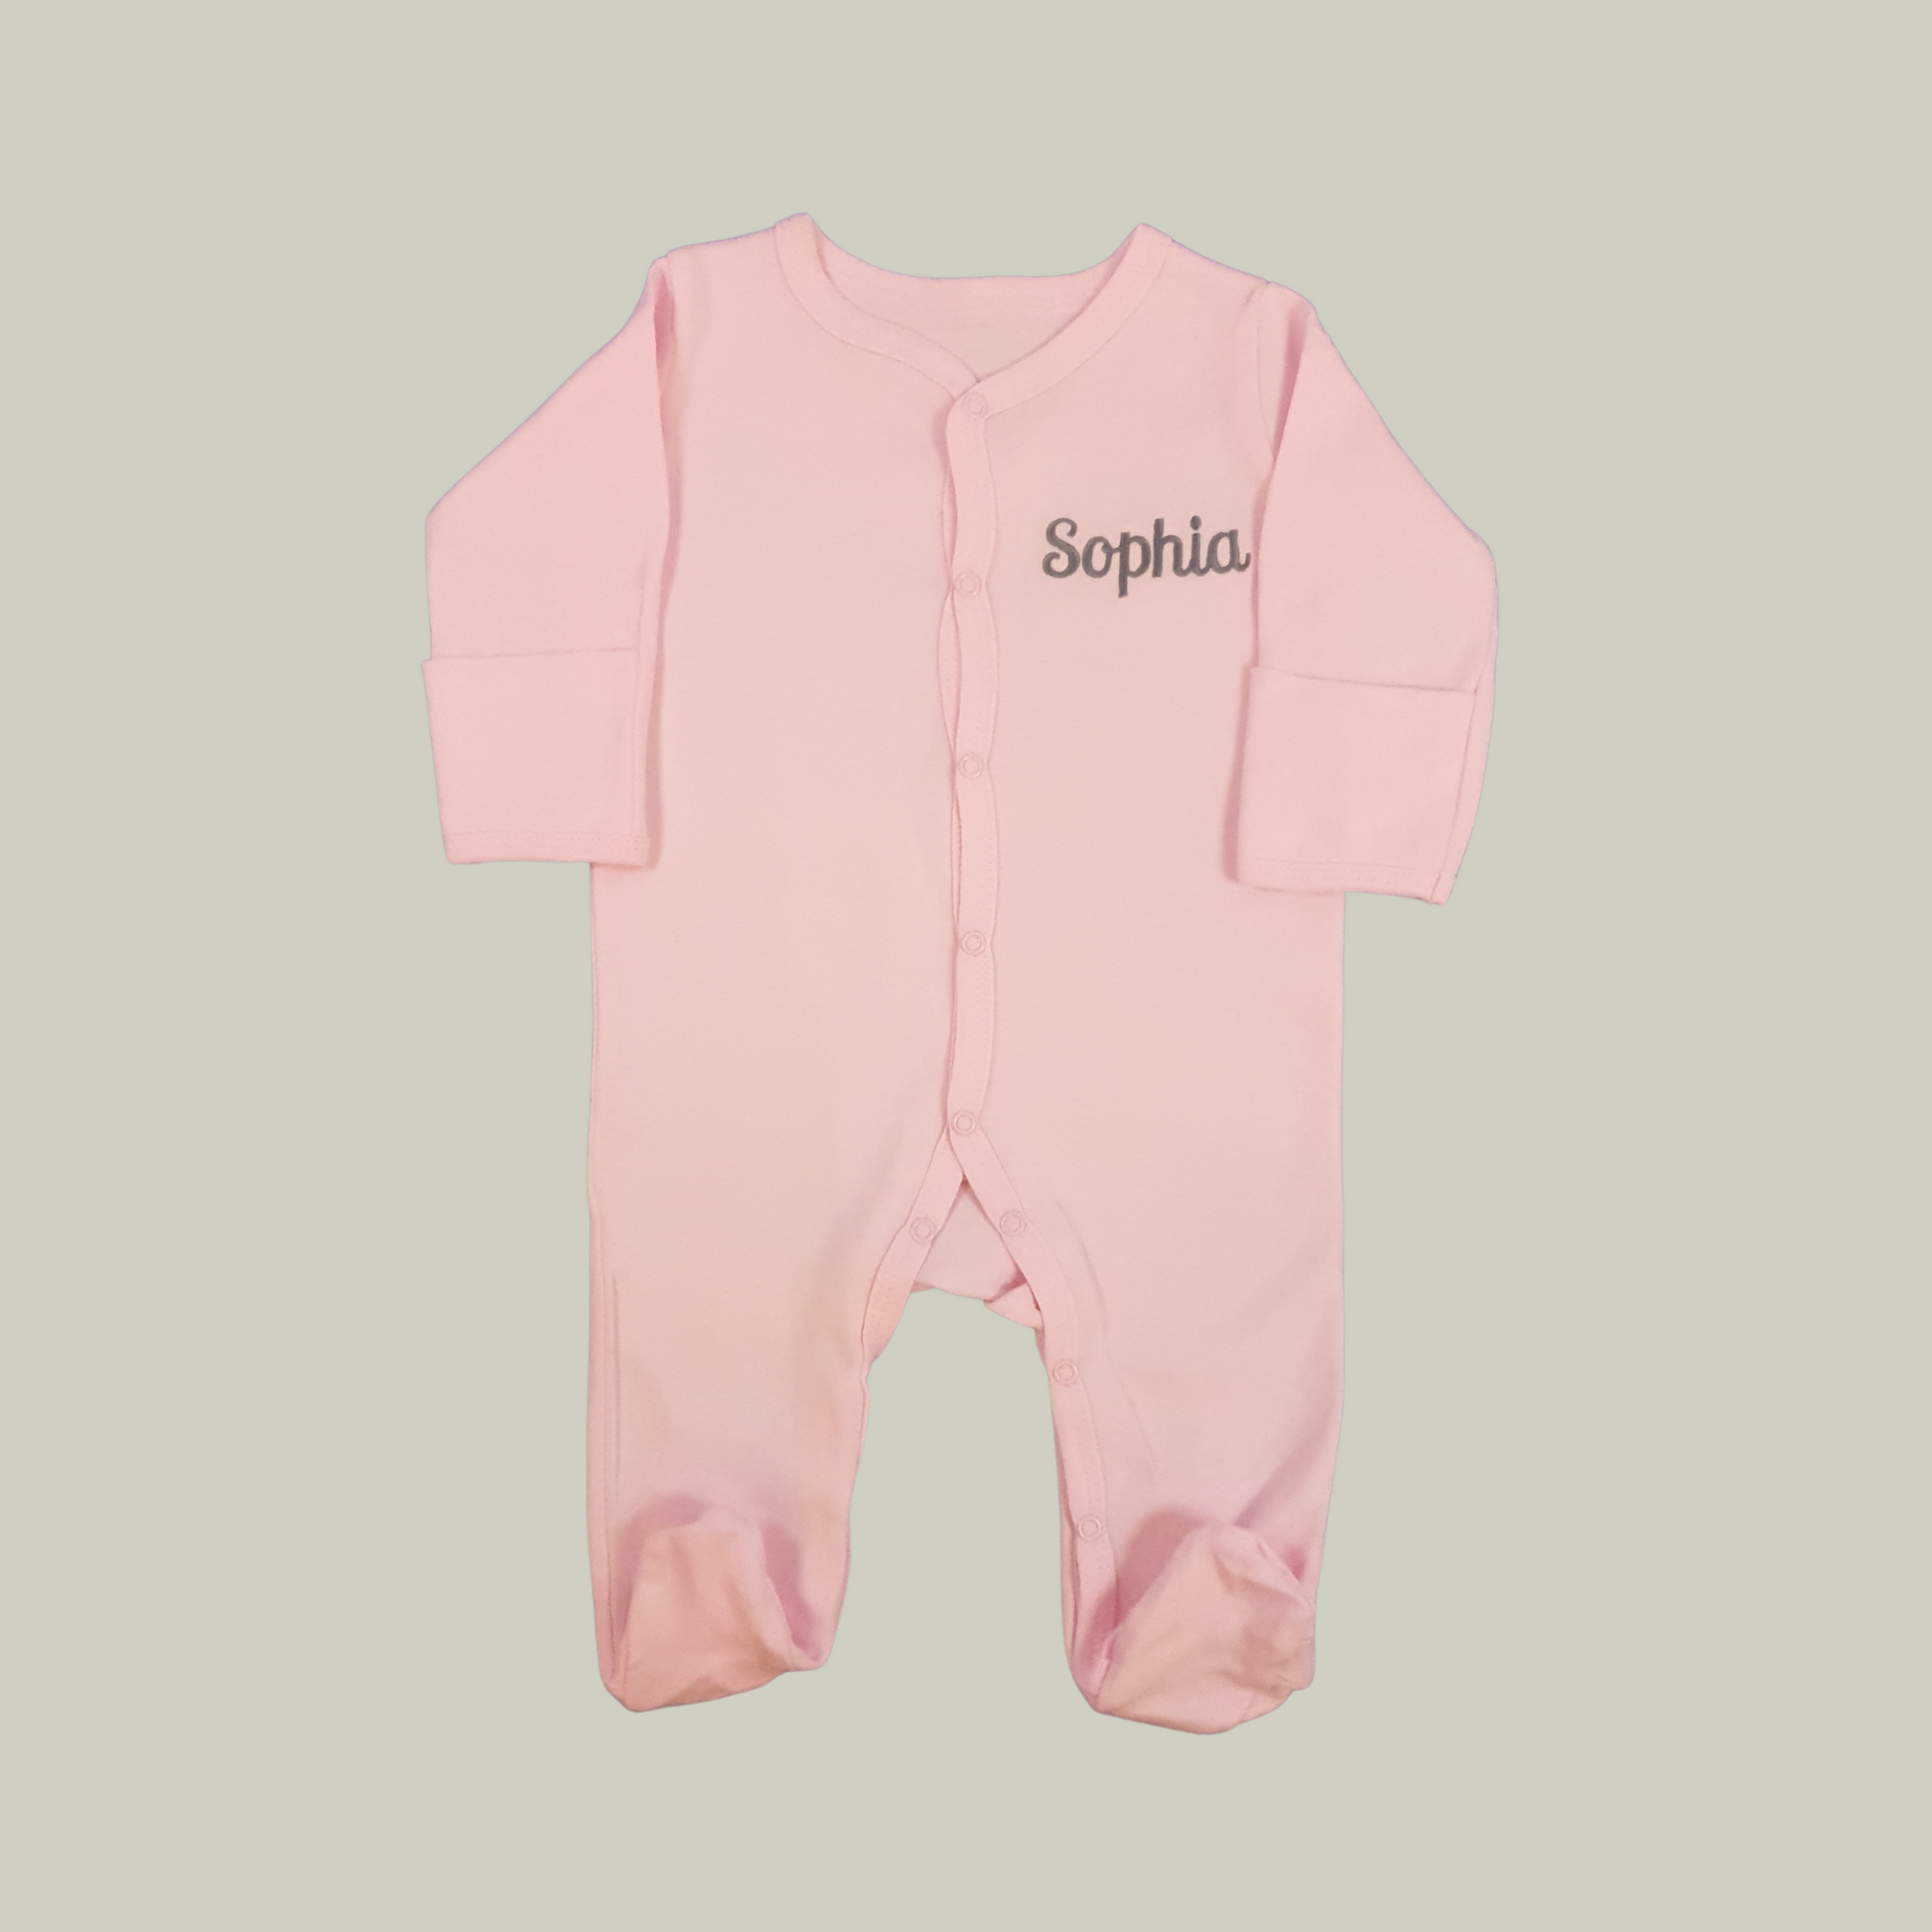 Personalised Pink Baby suit/grow